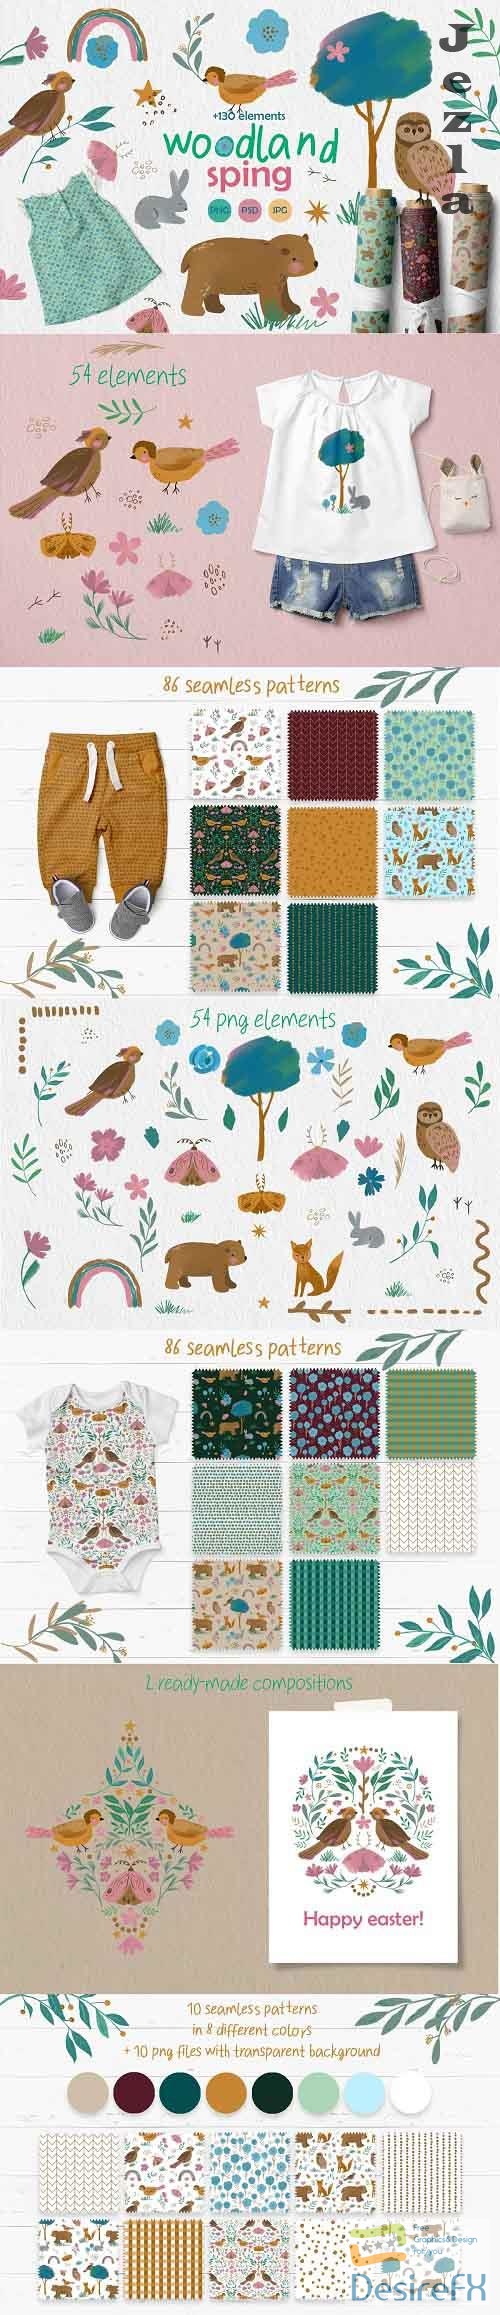 Woodland spring, clipart &amp; patterns - 5830263